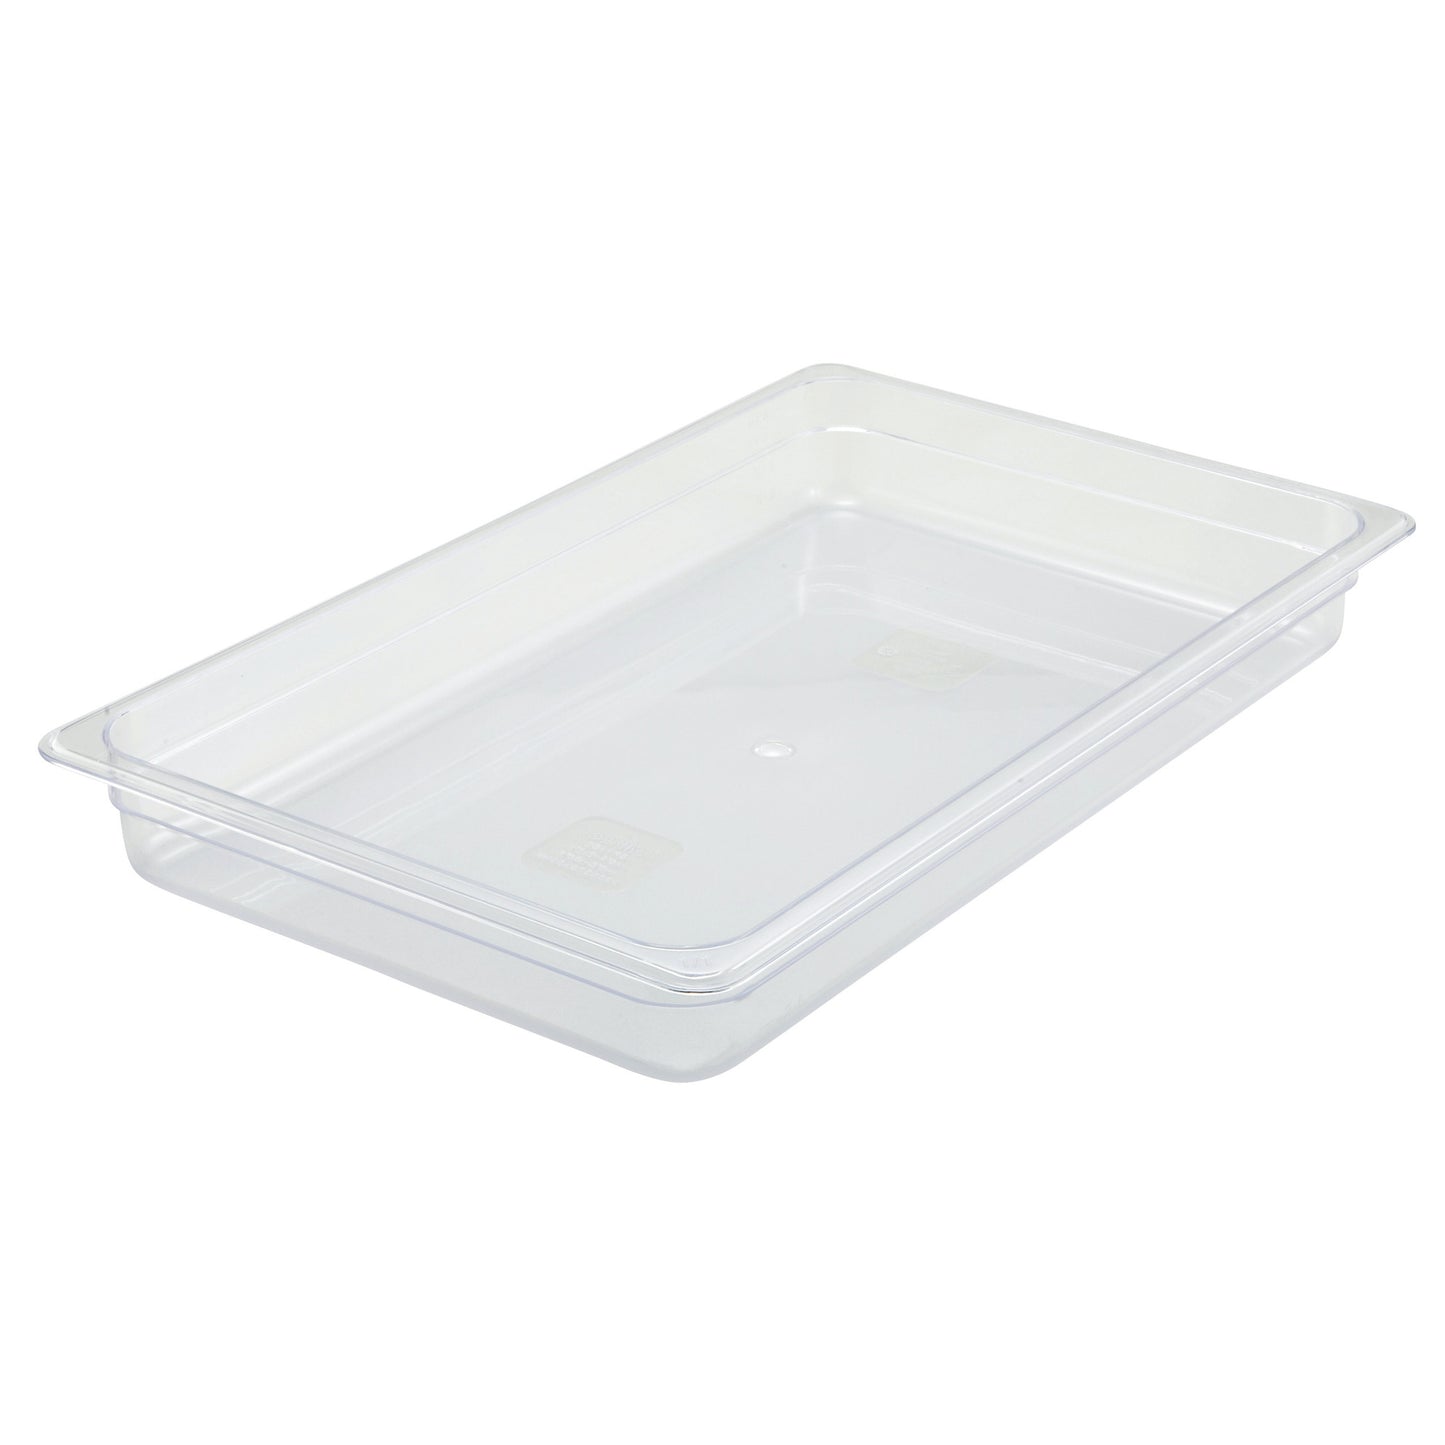 SP7102 - Polycarbonate Food Pan, Full-Size - 2-1/2"